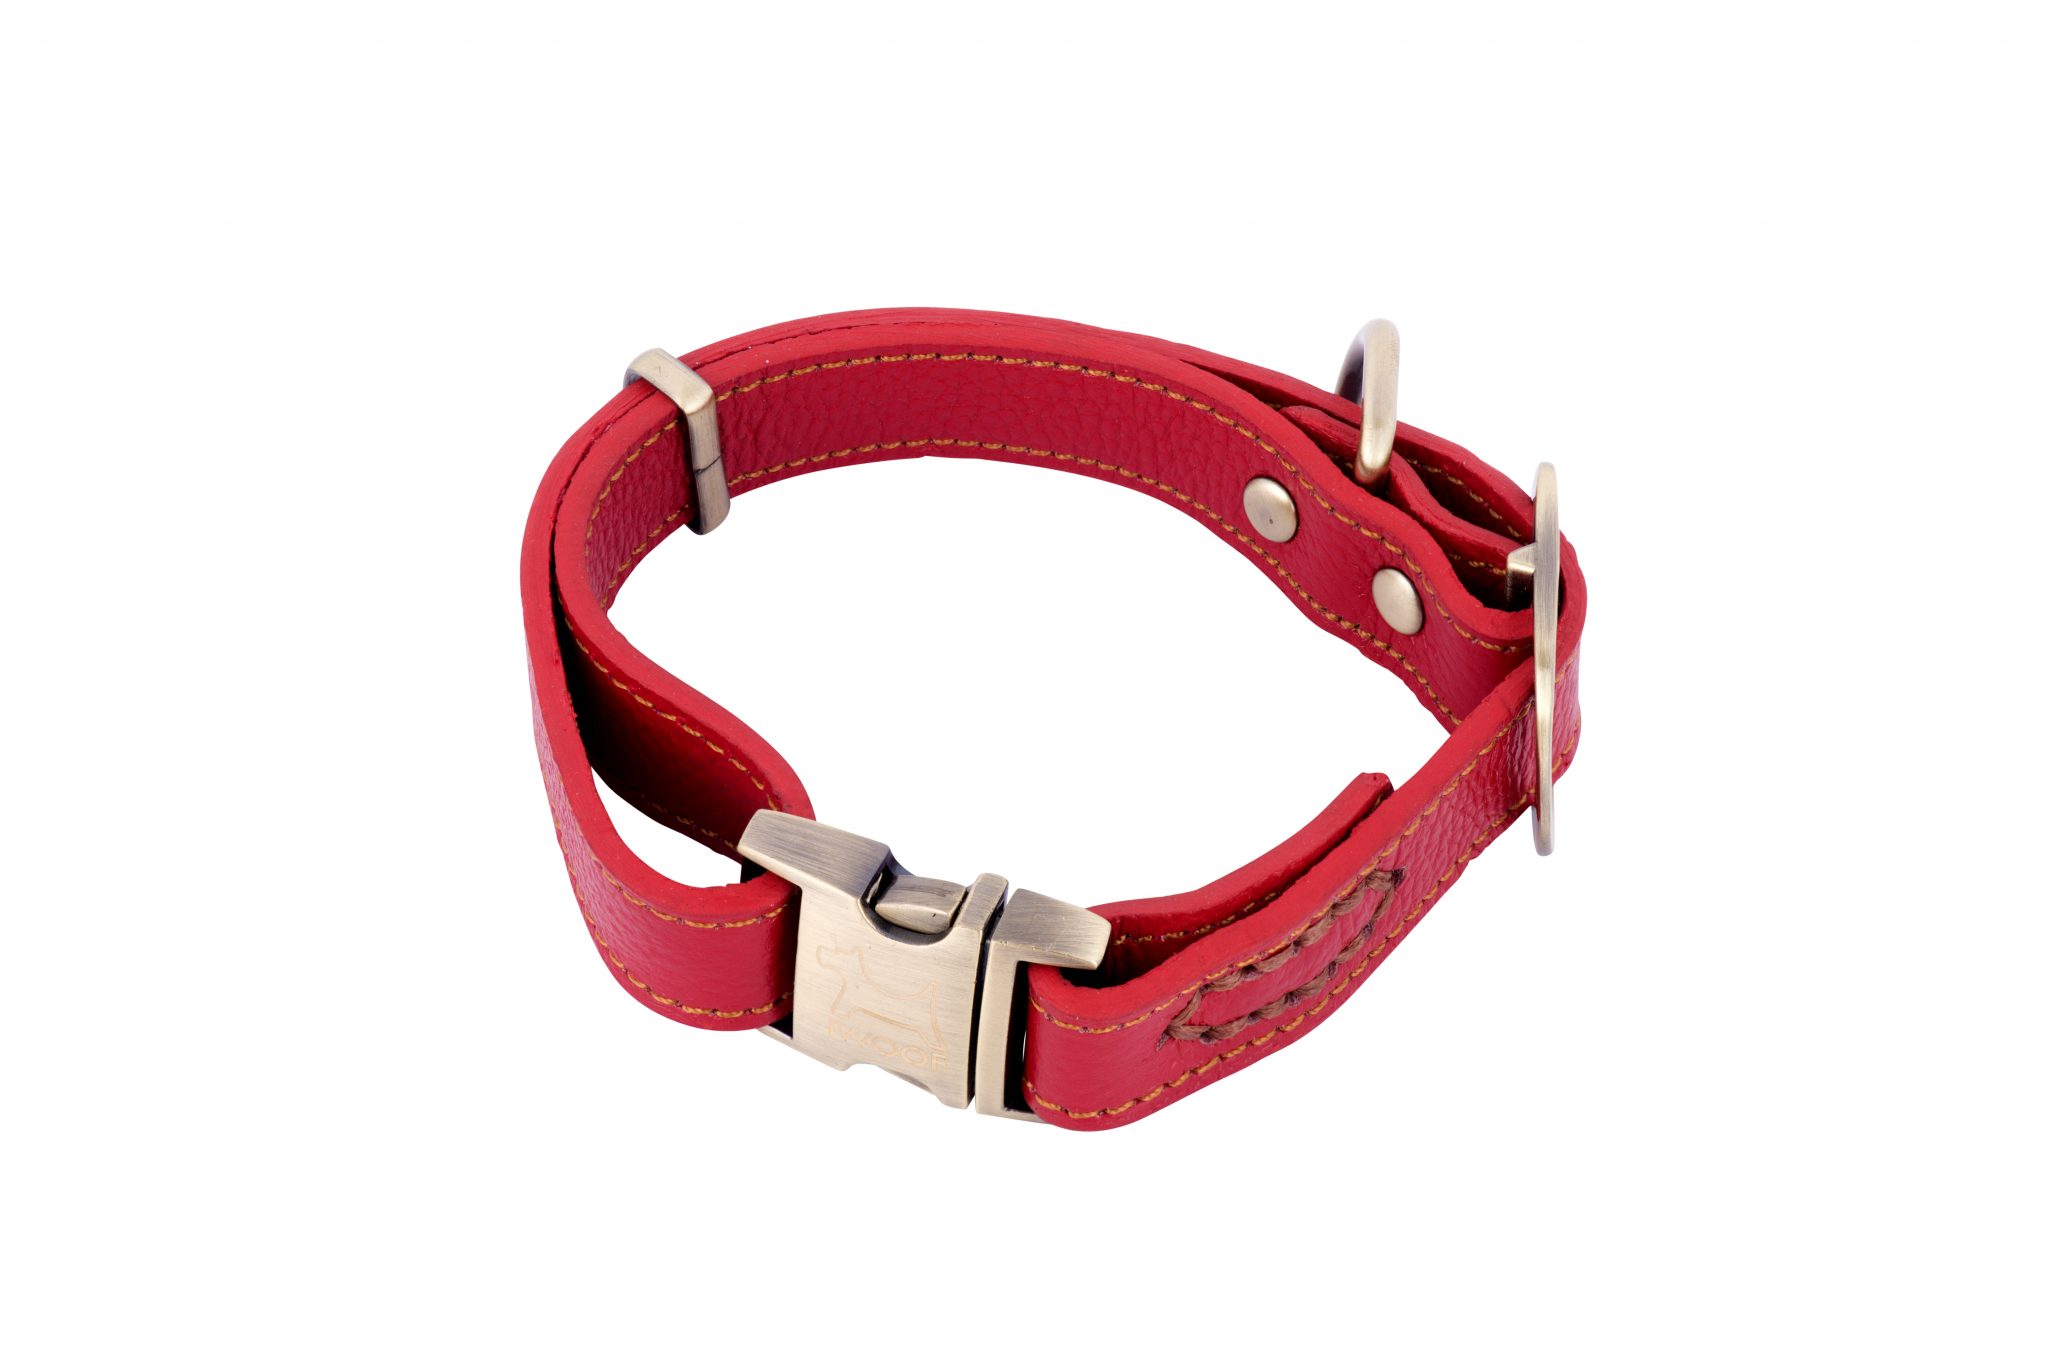 POLZEATH leather designer dog collar in red by IWOOF